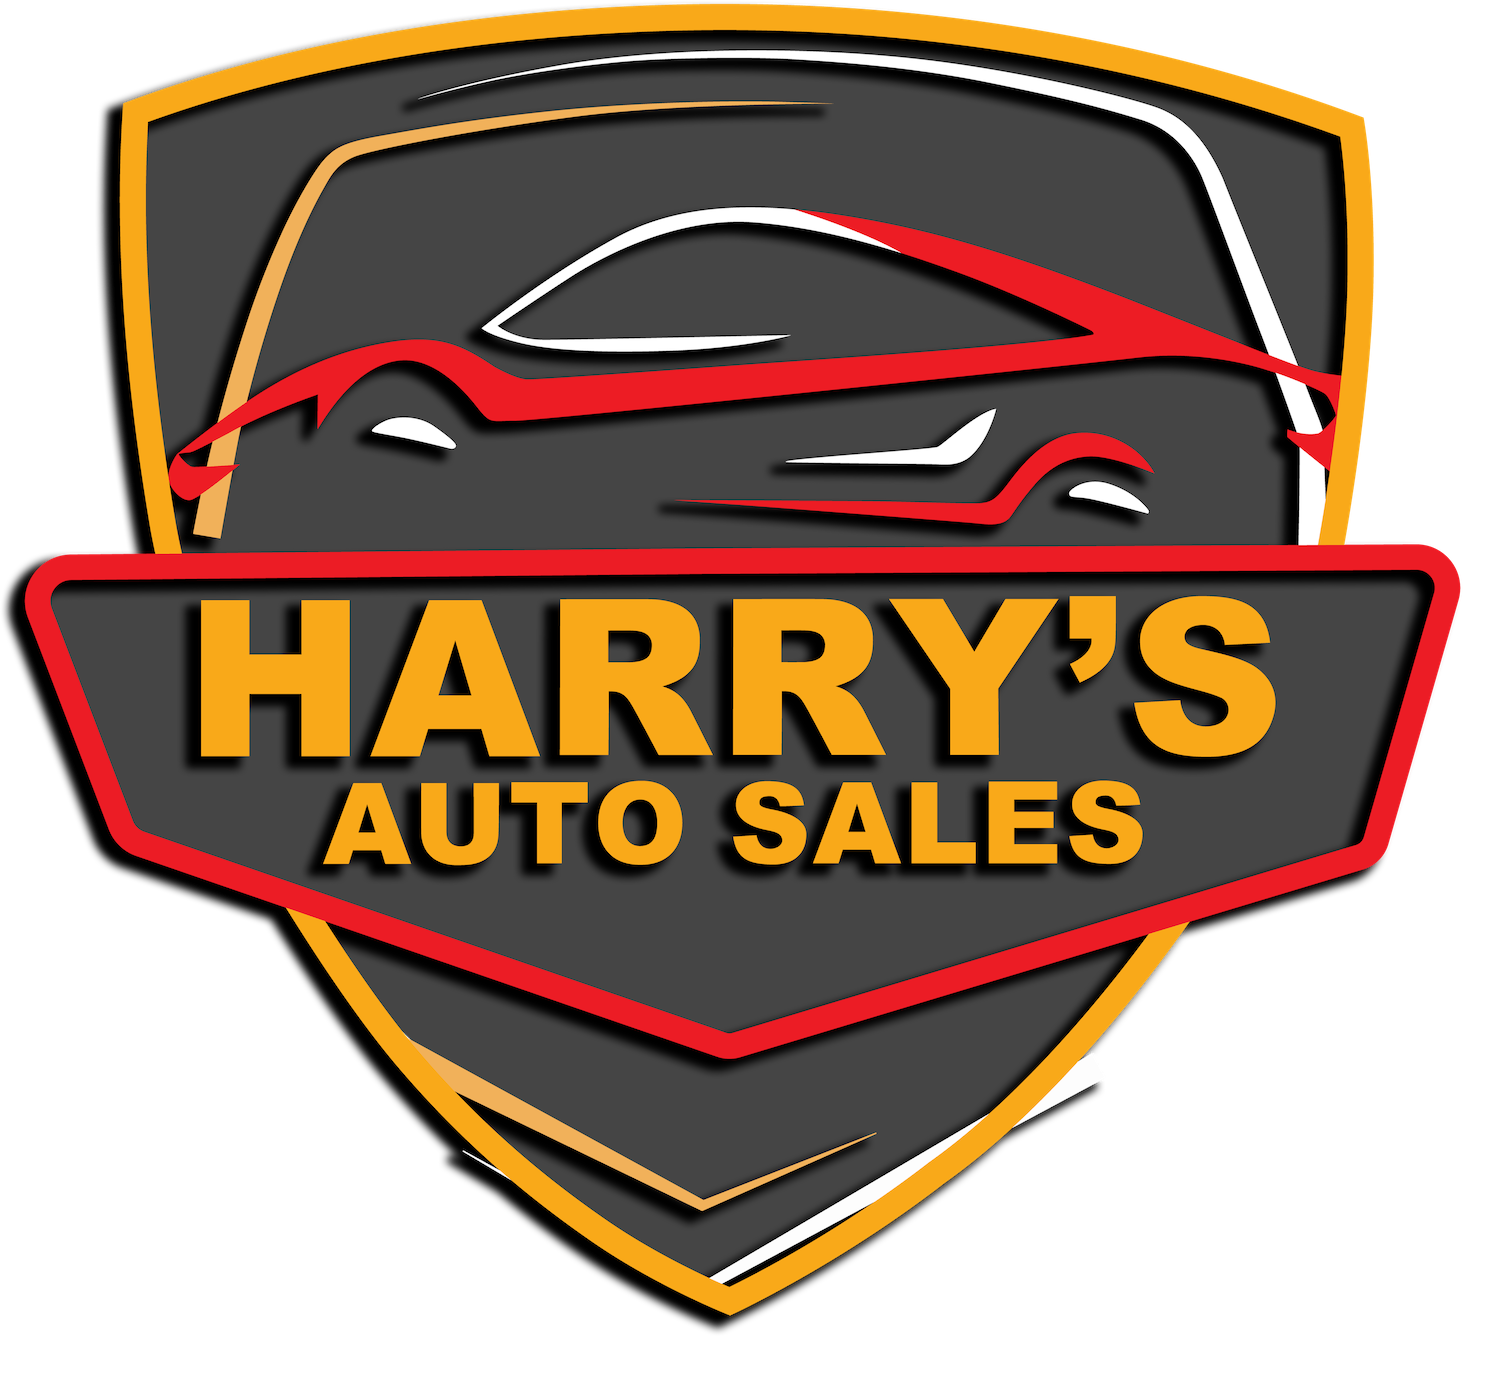 Harry's Auto Sales | Used Car Dealer | Buy & Sell Used Cars